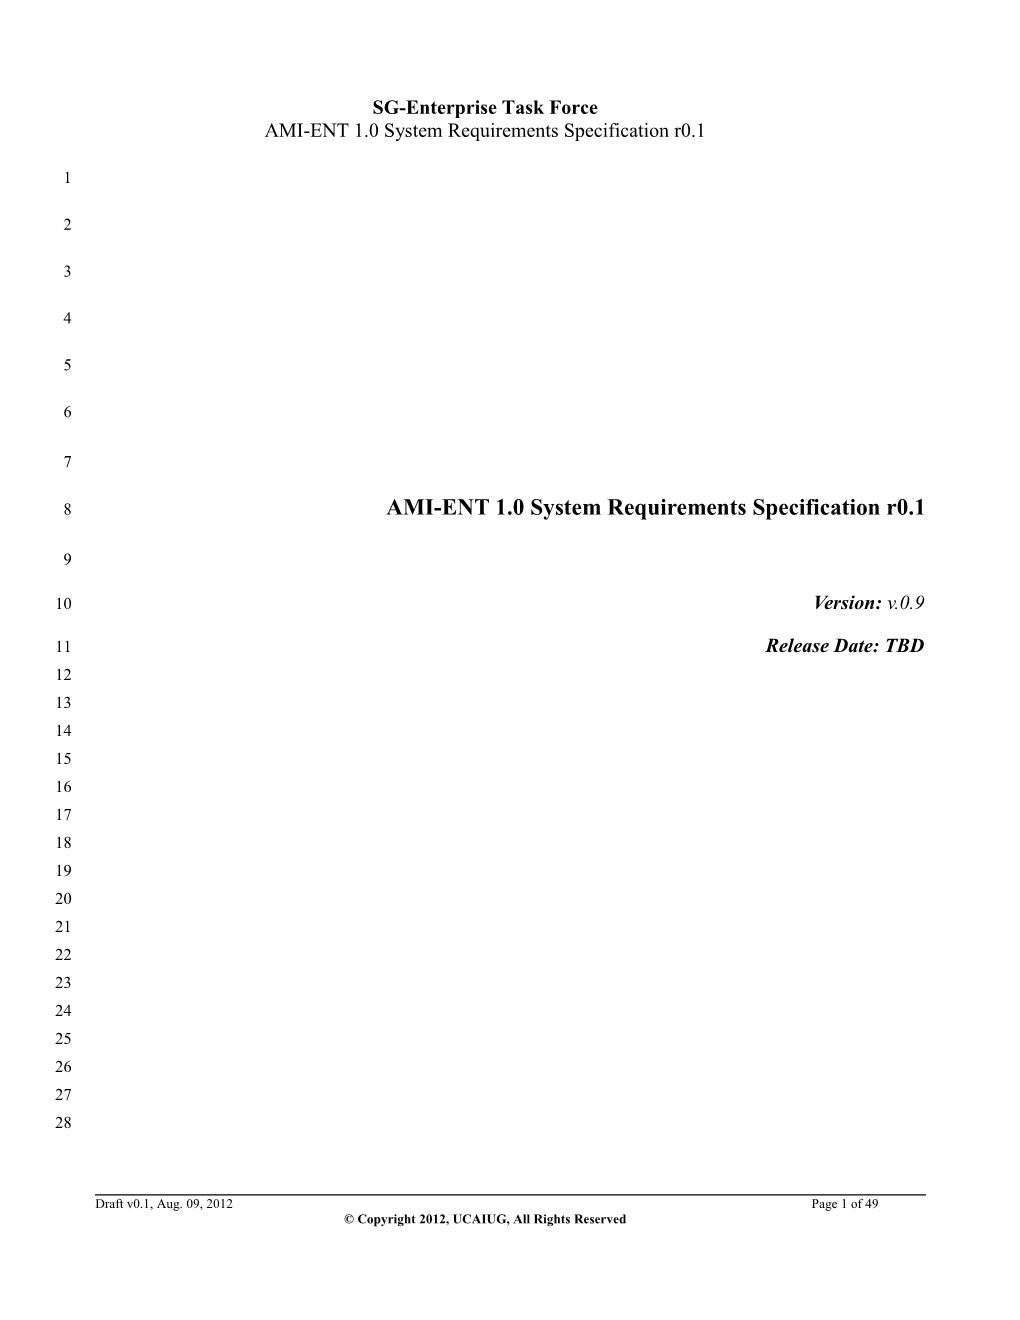 AMI-ENT 1.0 System Requirements Specification R0.1